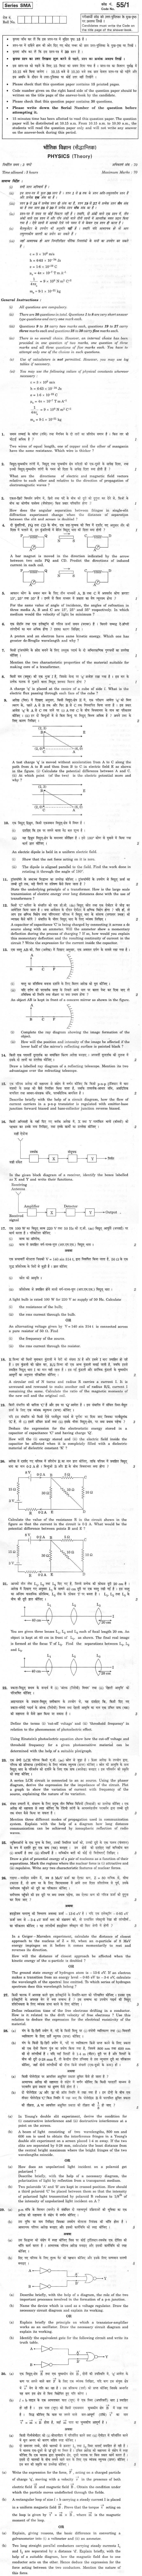 CBSE Class XII Previous Year Question Paper 2012 Physics